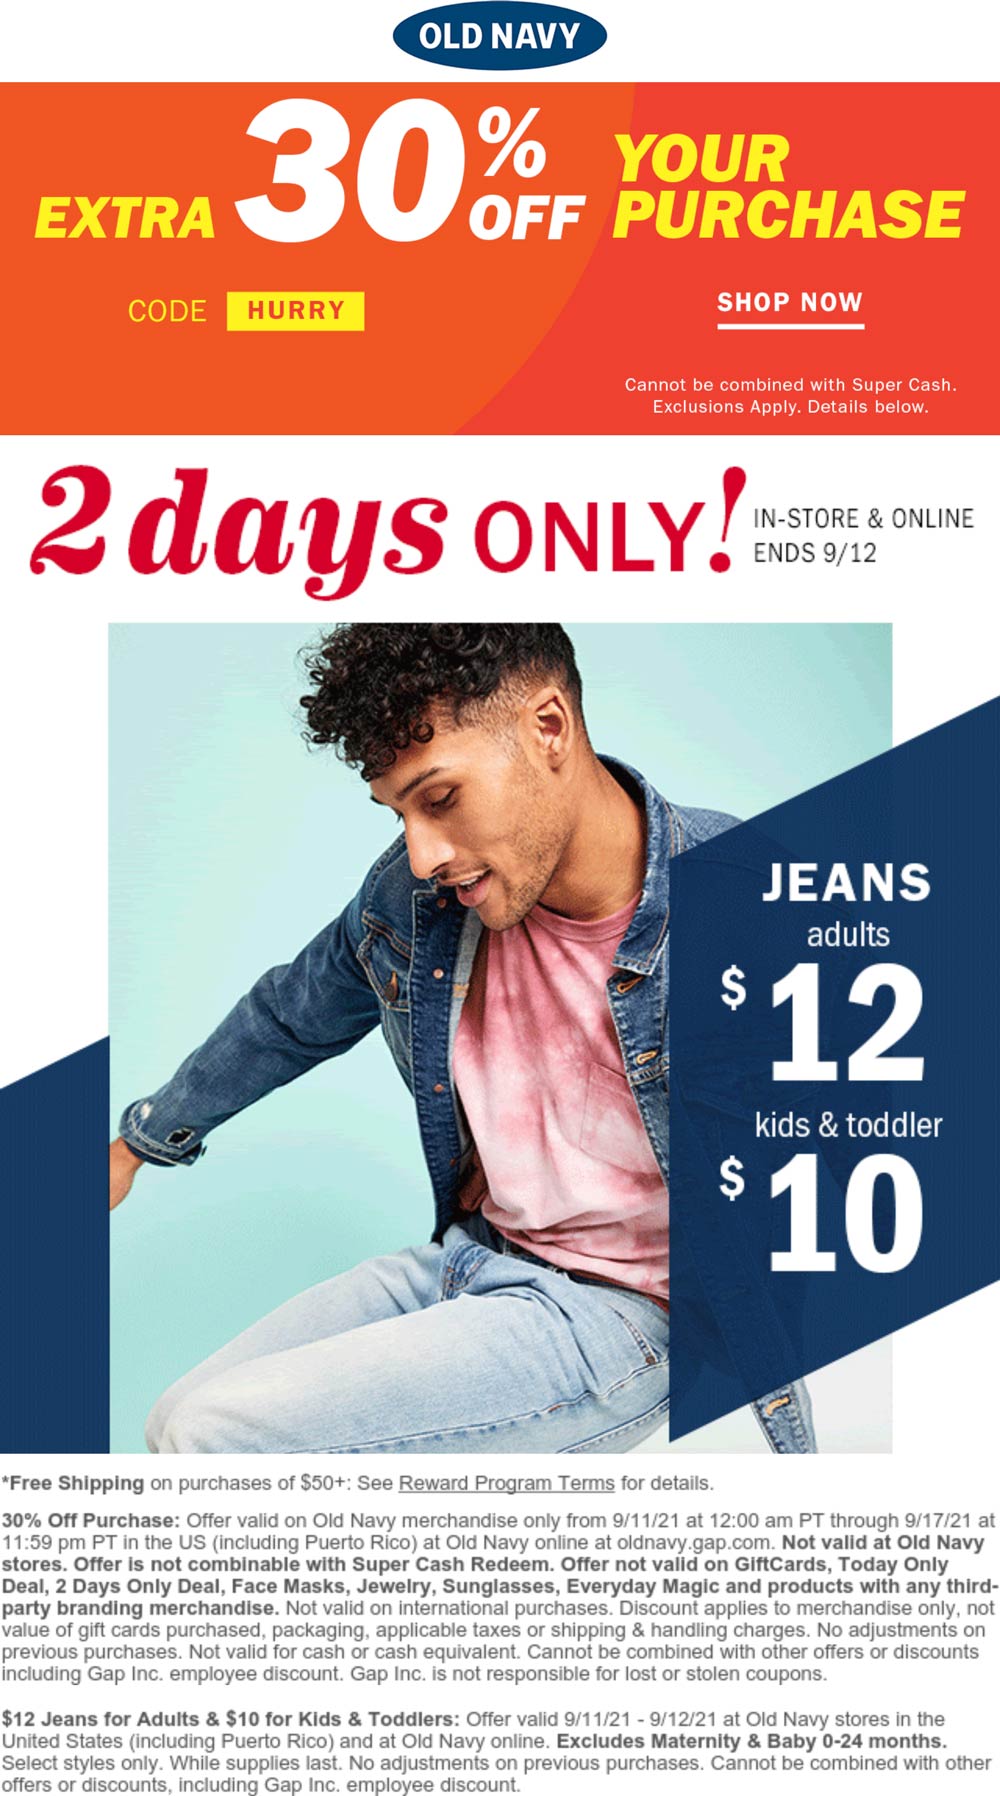 Old Navy stores Coupon  30% off online at Old Navy via promo code HURRY #oldnavy 